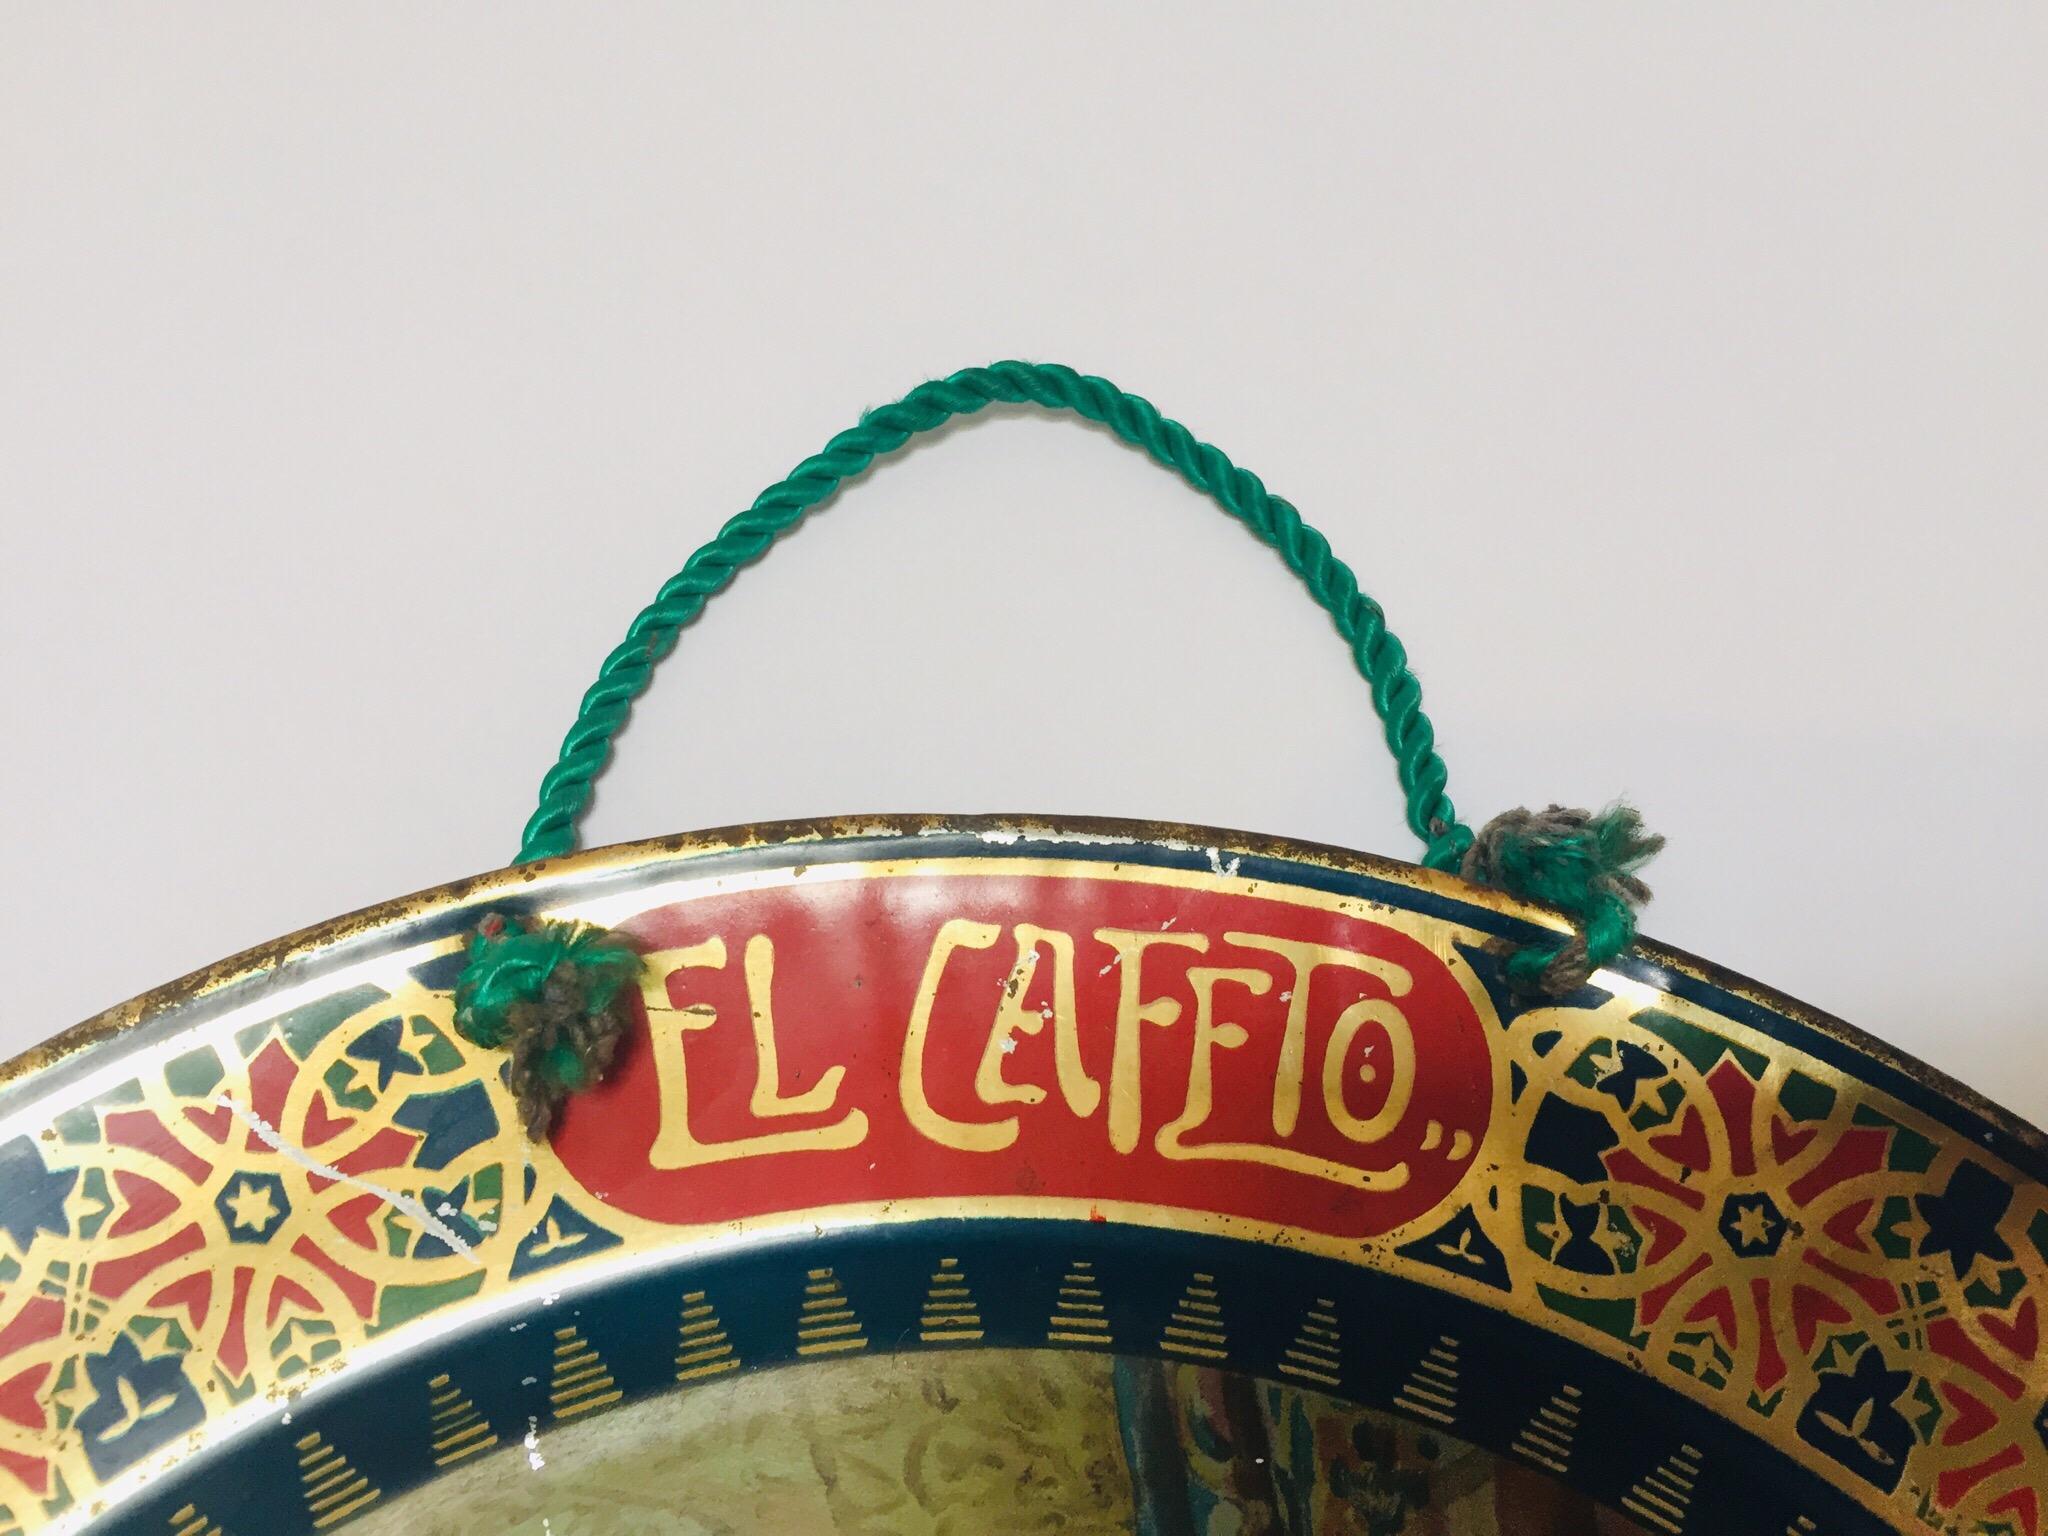 El Cafeto Metal Hanging Advertising Plate with a Moorish Prince 8